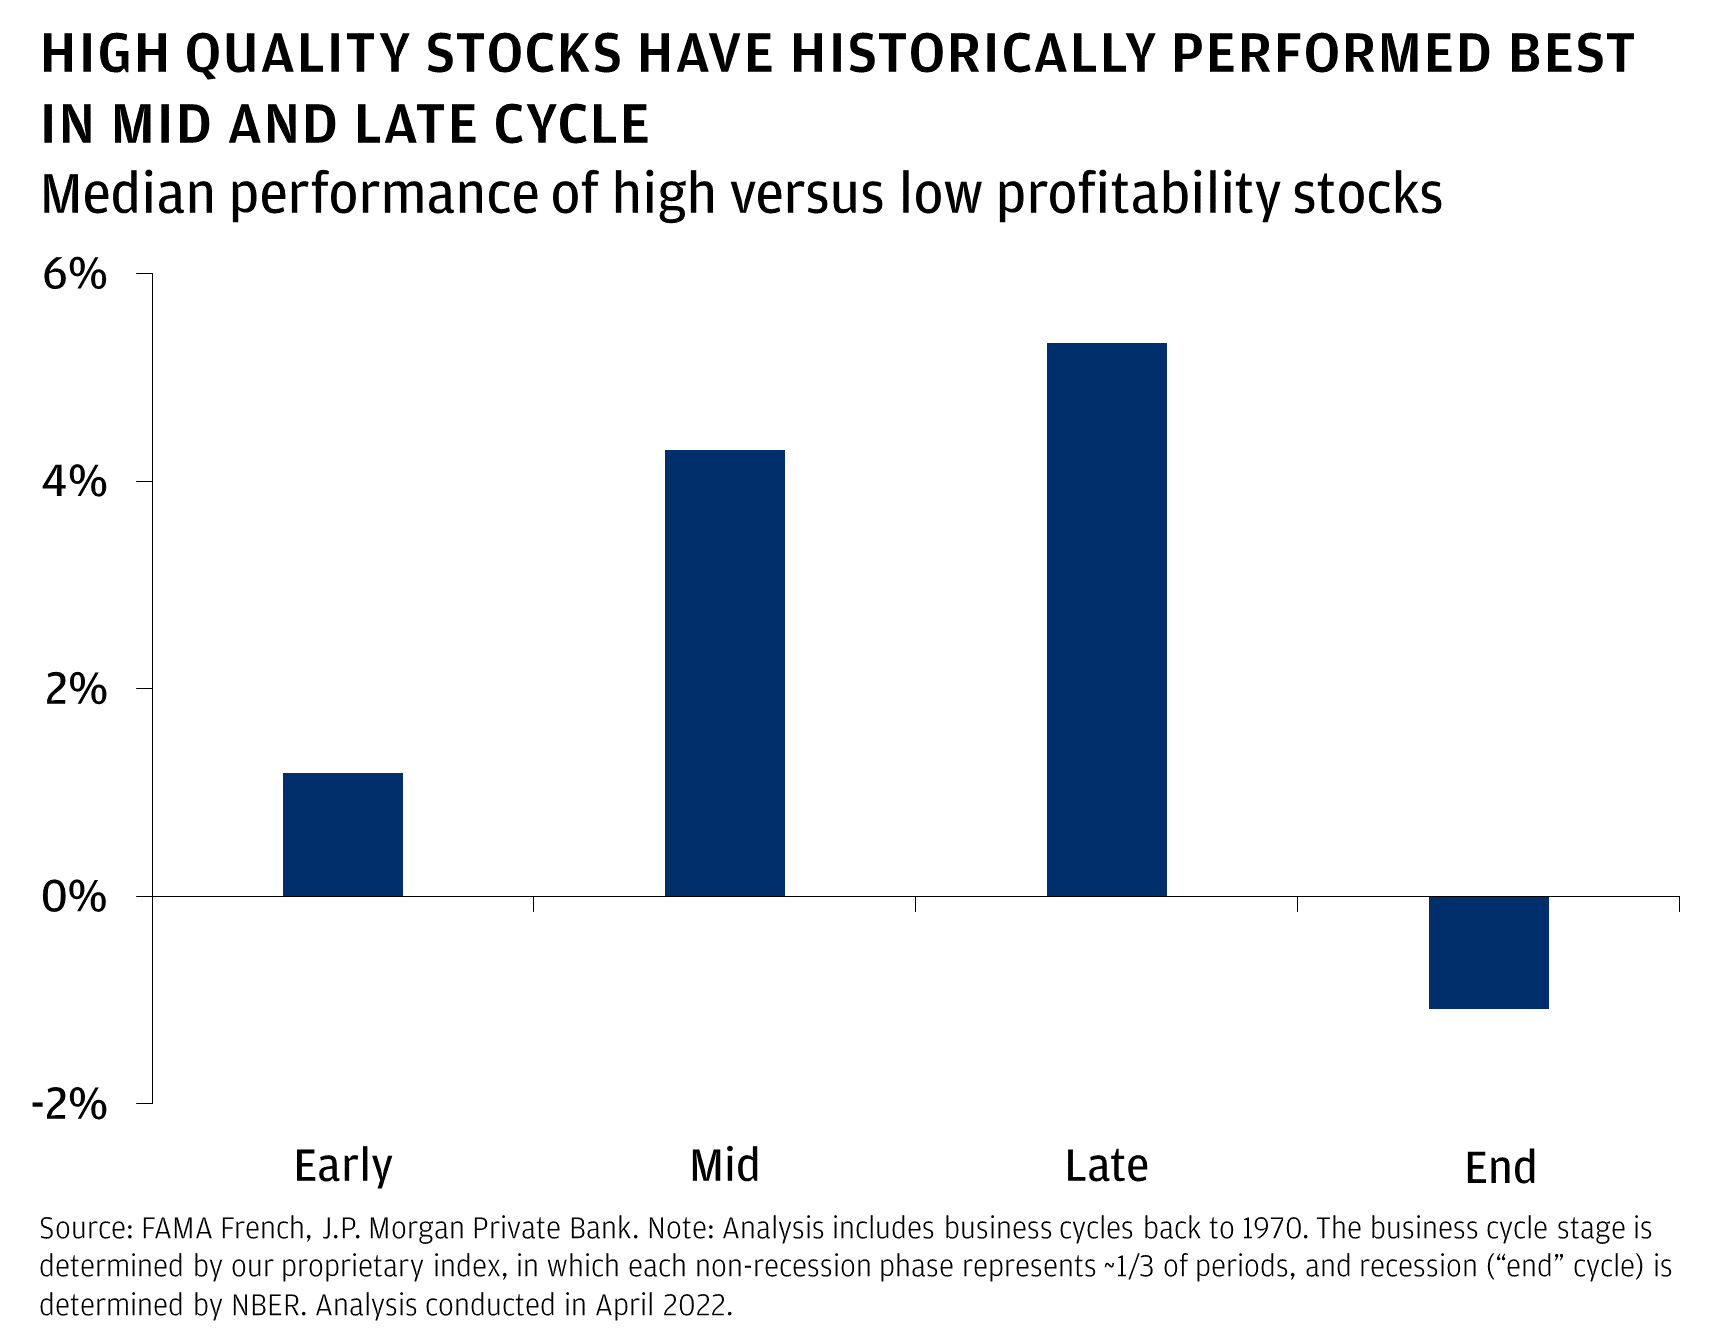 This chart shows the median performance of high versus low profitability stock. It shows that high profitability stocks underperform by -1.1% during a recession, outperform by 1.2% in early-cycle, outperform by 4.3% in mid-cycle, and see their greatest outperformance of 5.3% in late-cycle